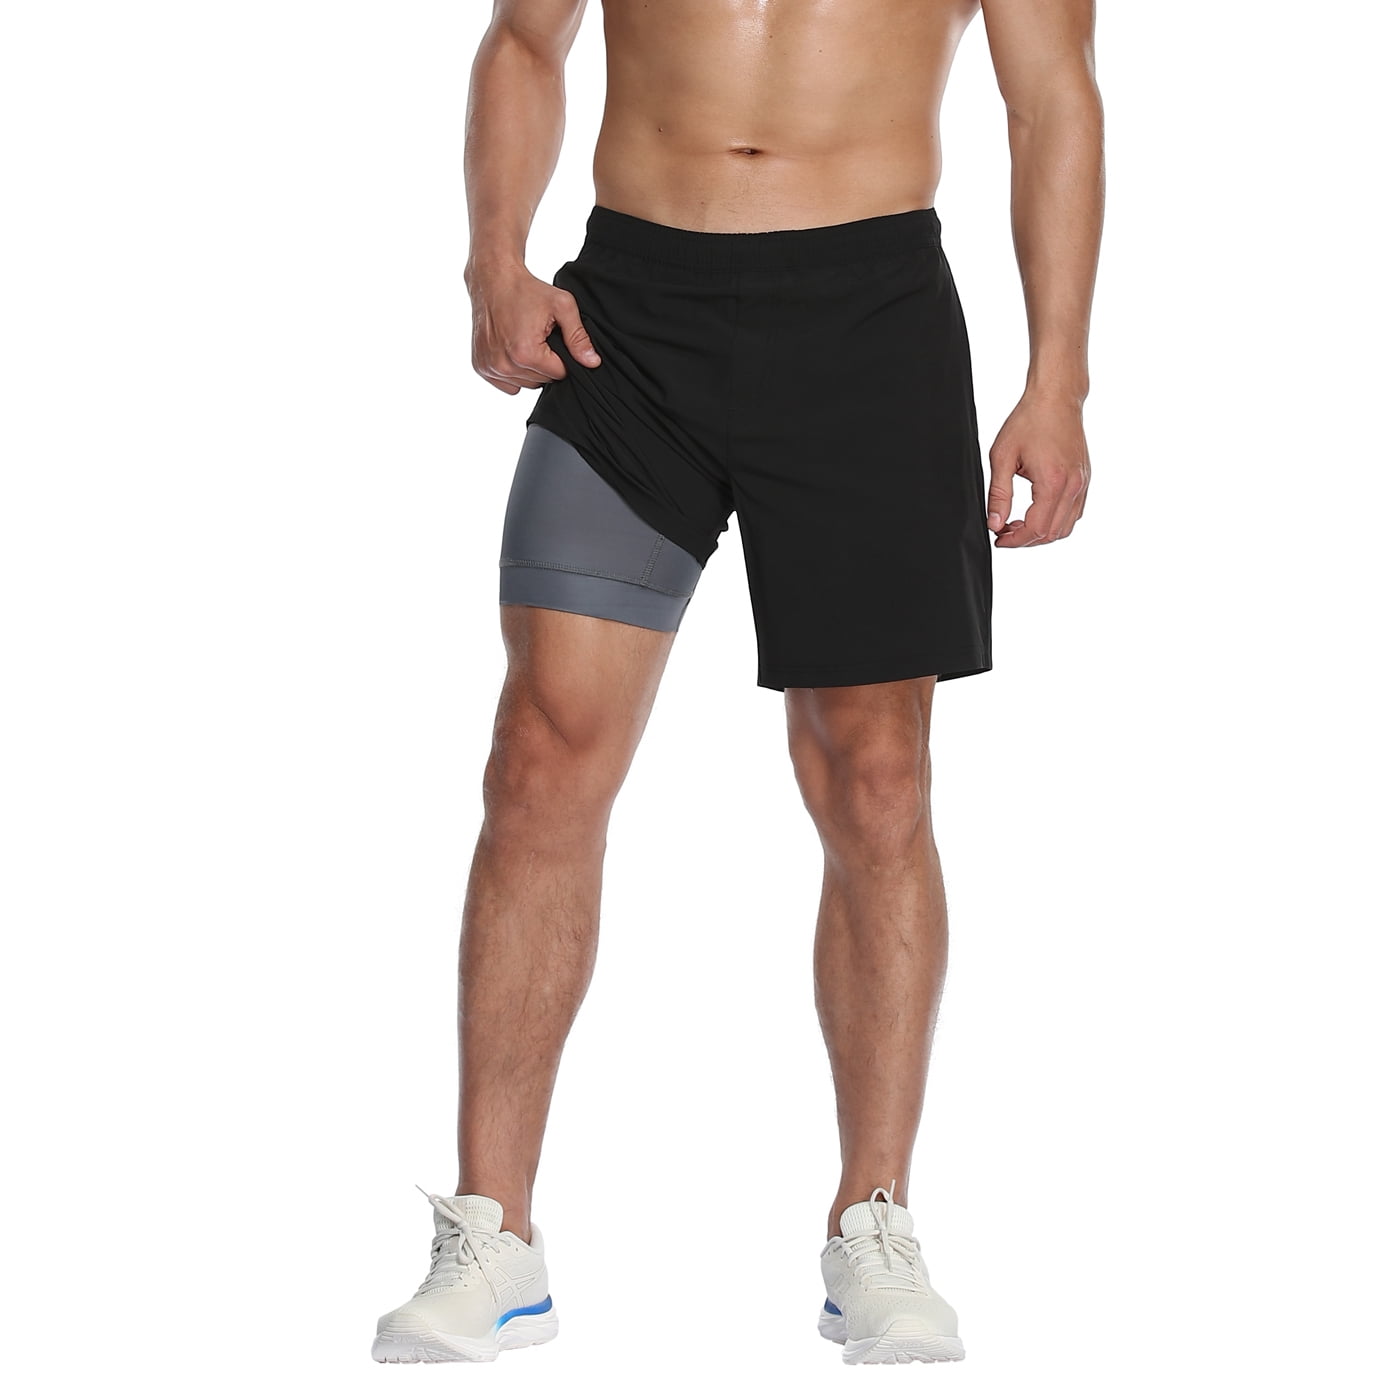 Workout Shorts With Pockets for Men French Terry Cotton 3 5 7 Inch Bodybuilding Clothing